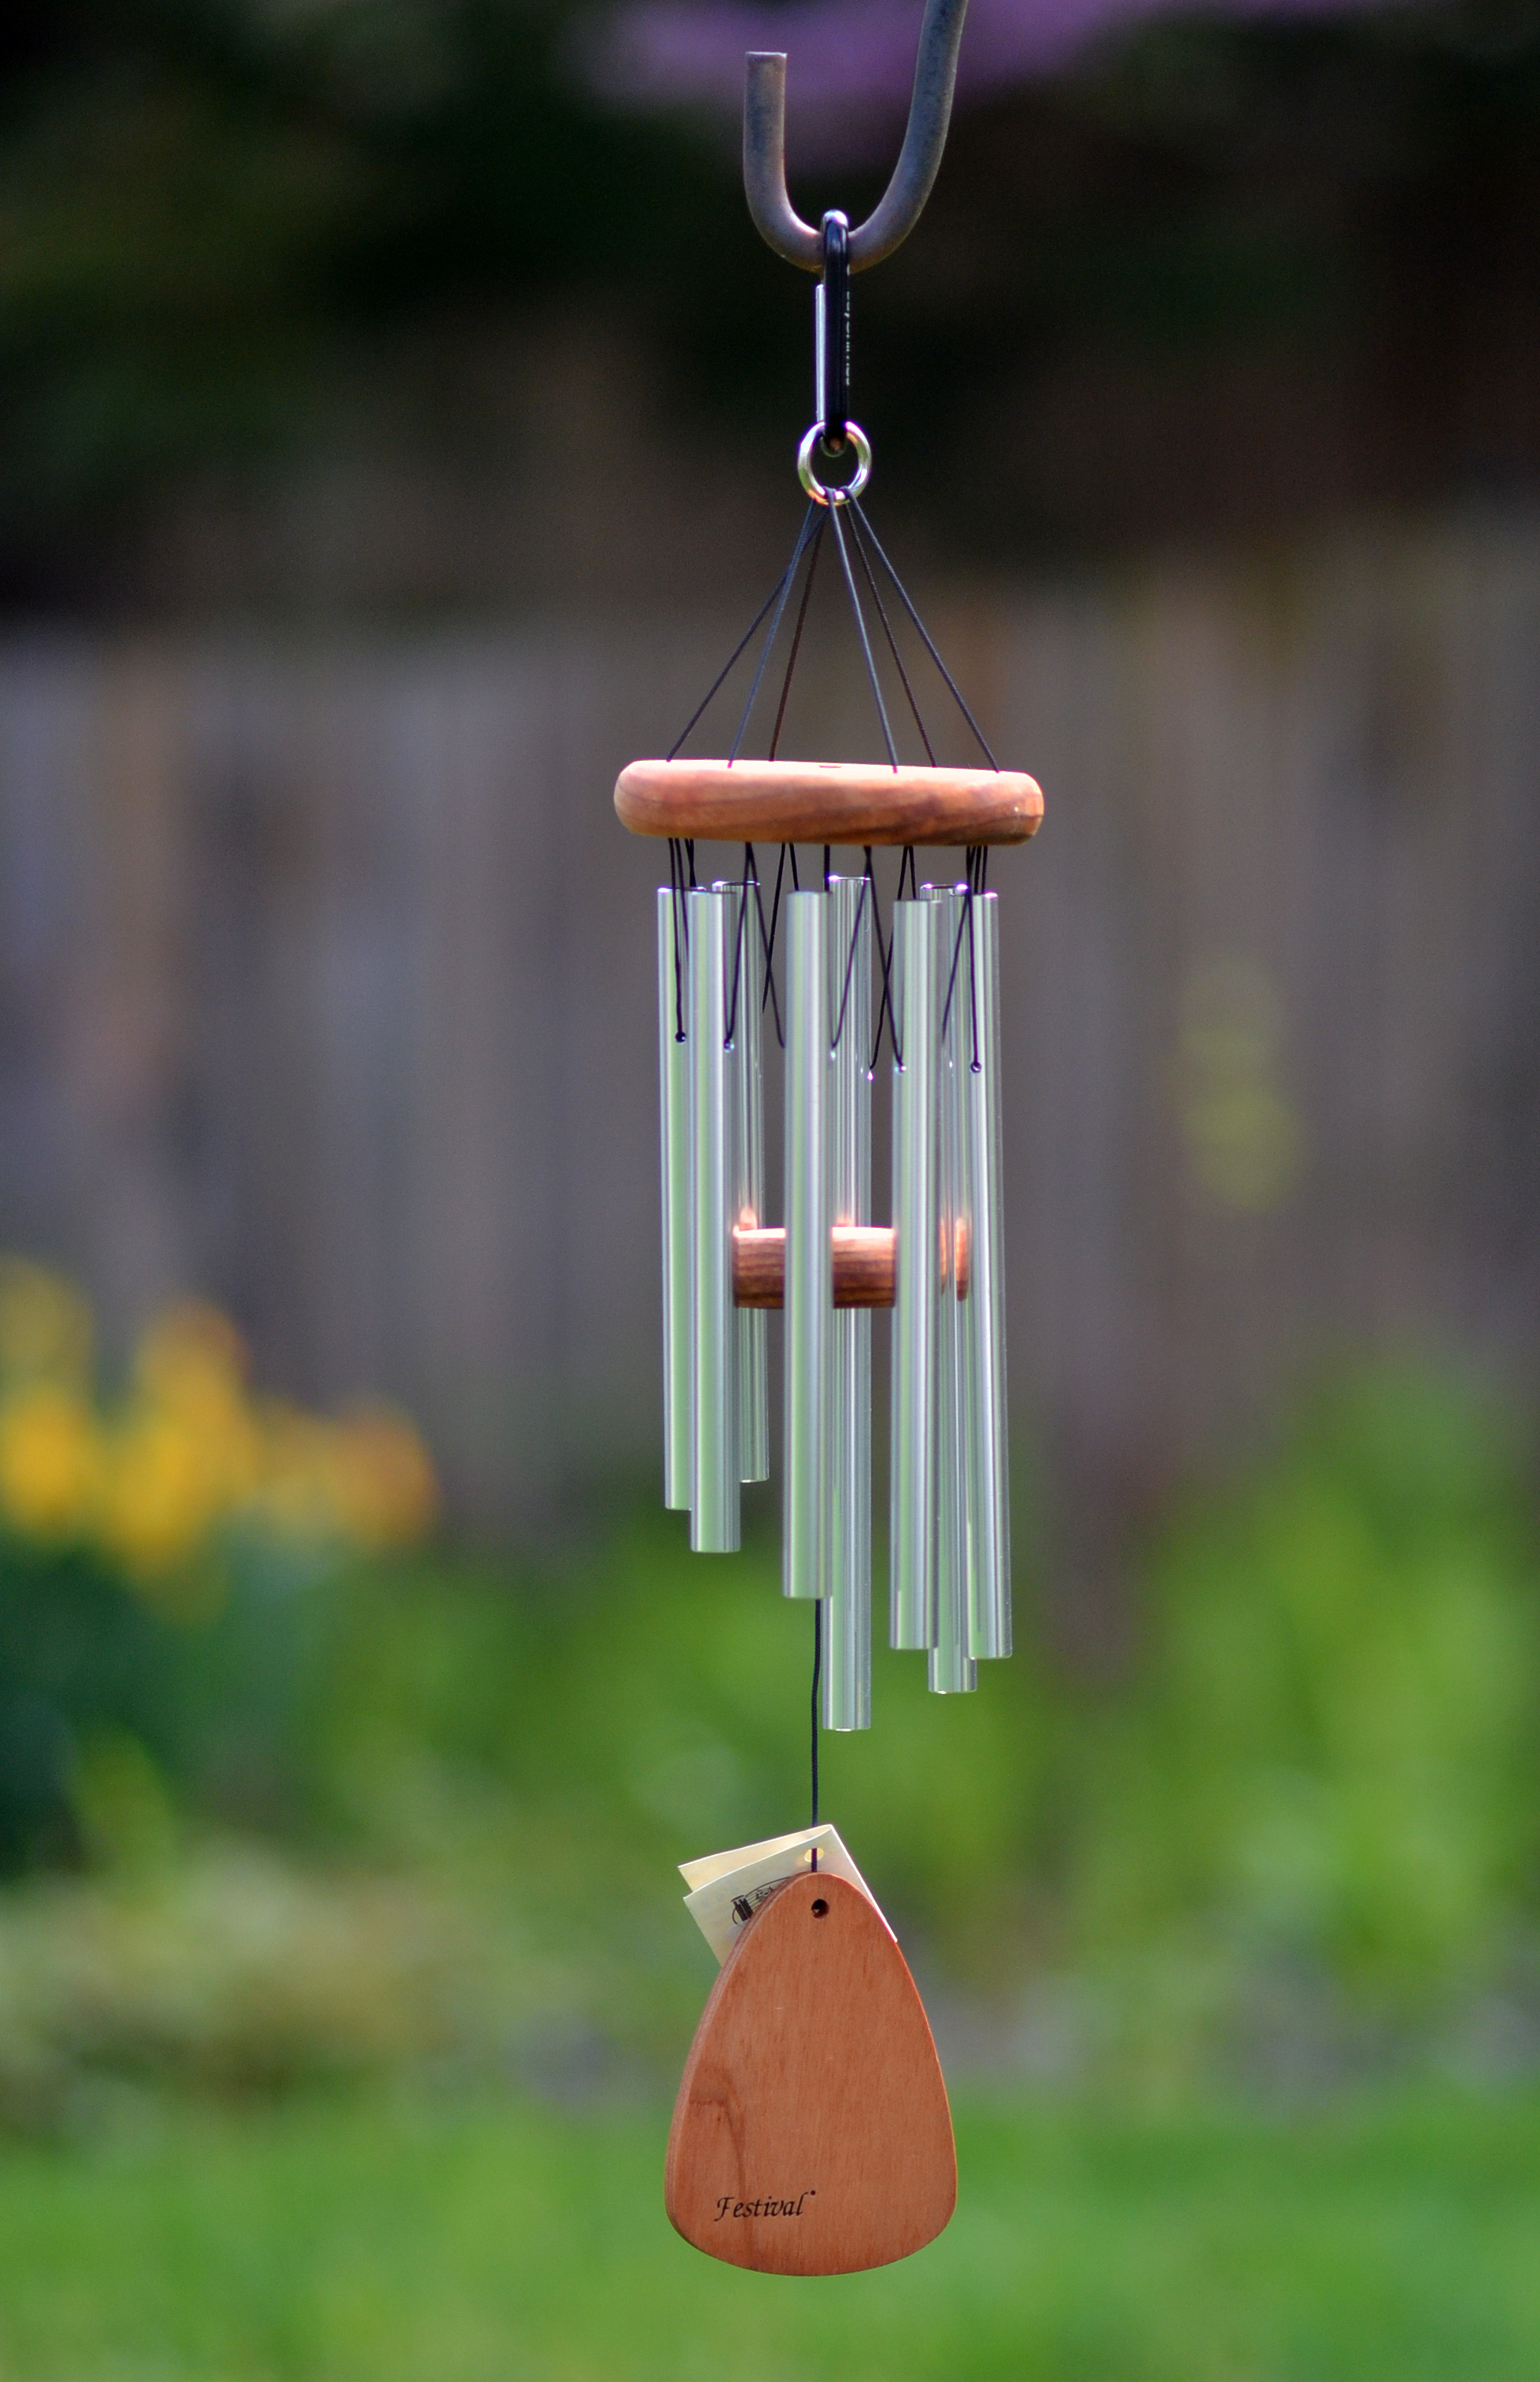 Festival 24-inch Chime with 8 tubes